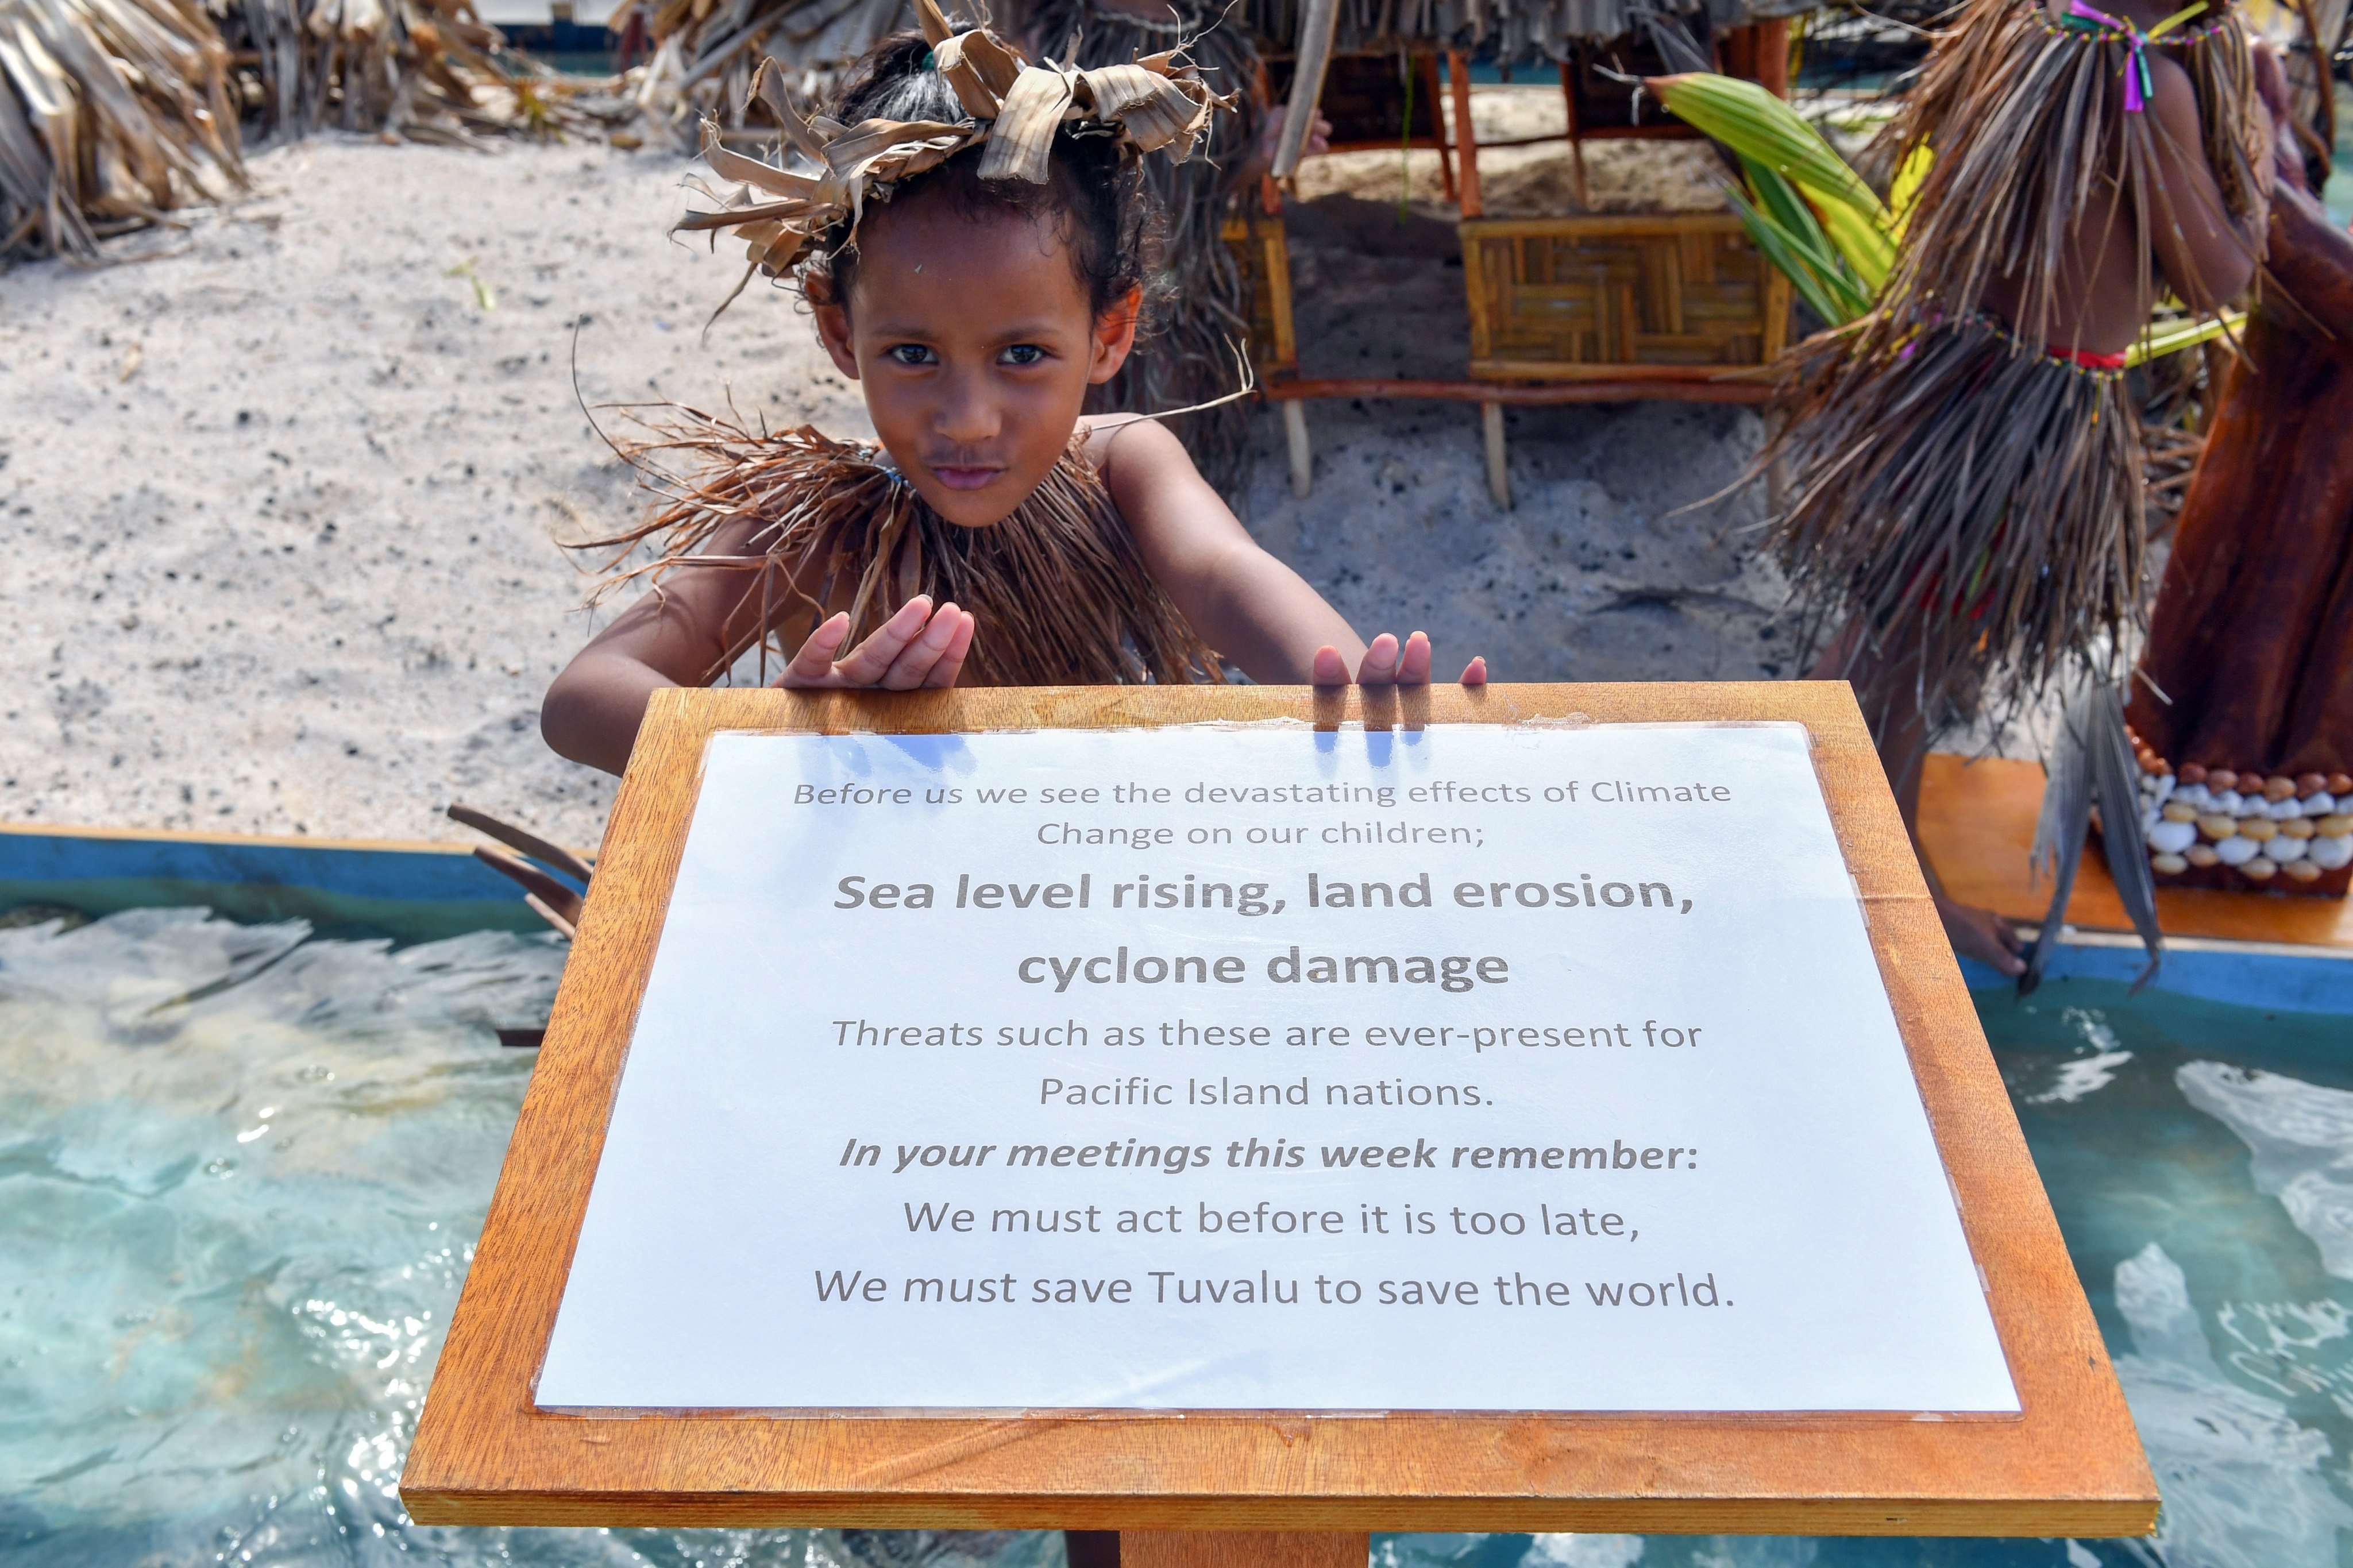 A child welcomes delegates to the Pacific Islands Forum on August 14, 2019, in Funafuti, Tuvalu, a sinking island nation. Even the global disaster of climate warming affects different geographies differently. There is no development model that fits all nations. Photo: EPA-EFE